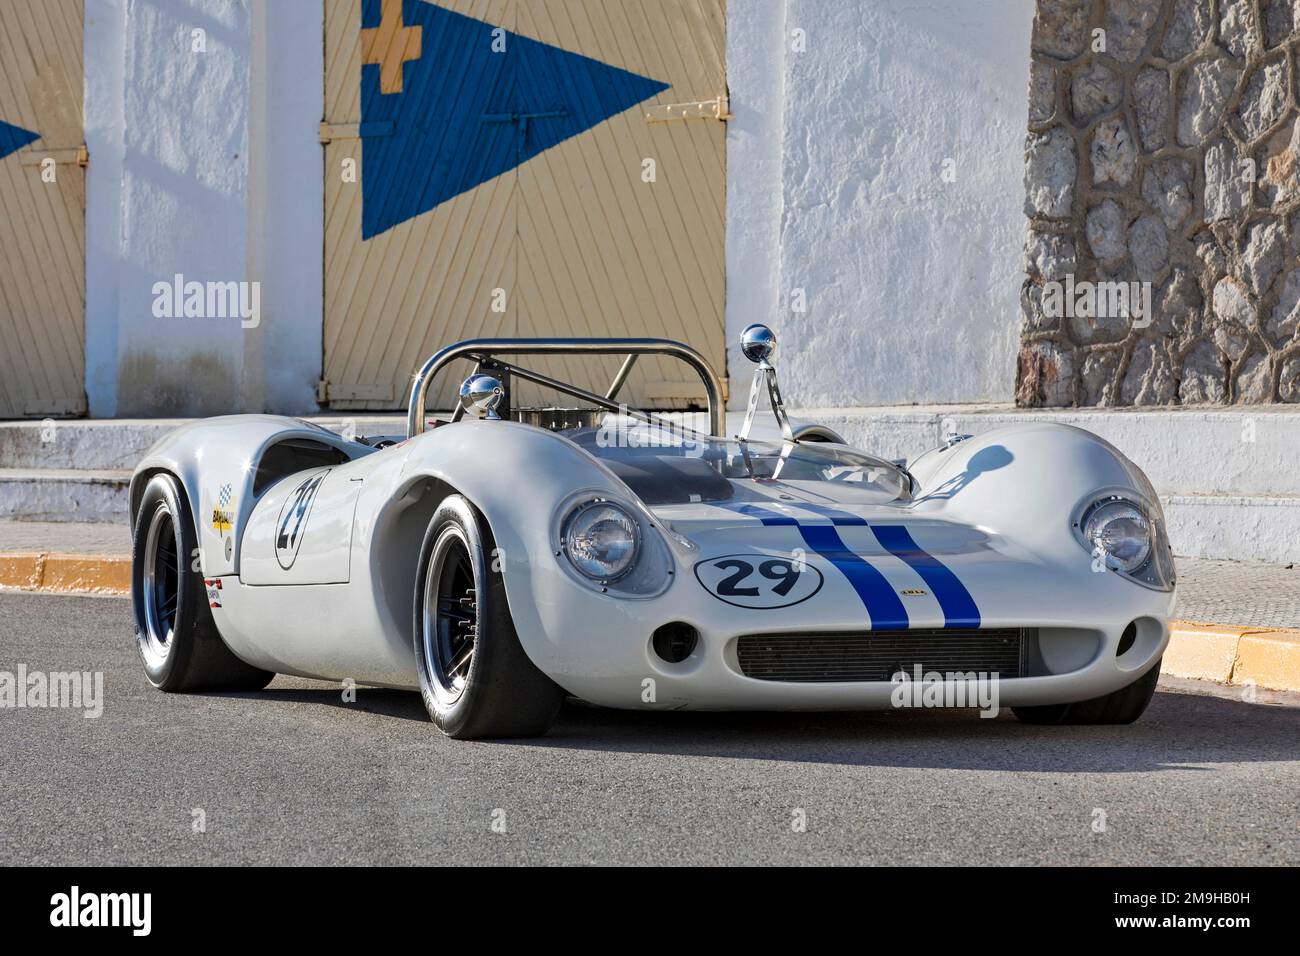 Lola T70 MkII Spyder sports car parked on road Stock Photo